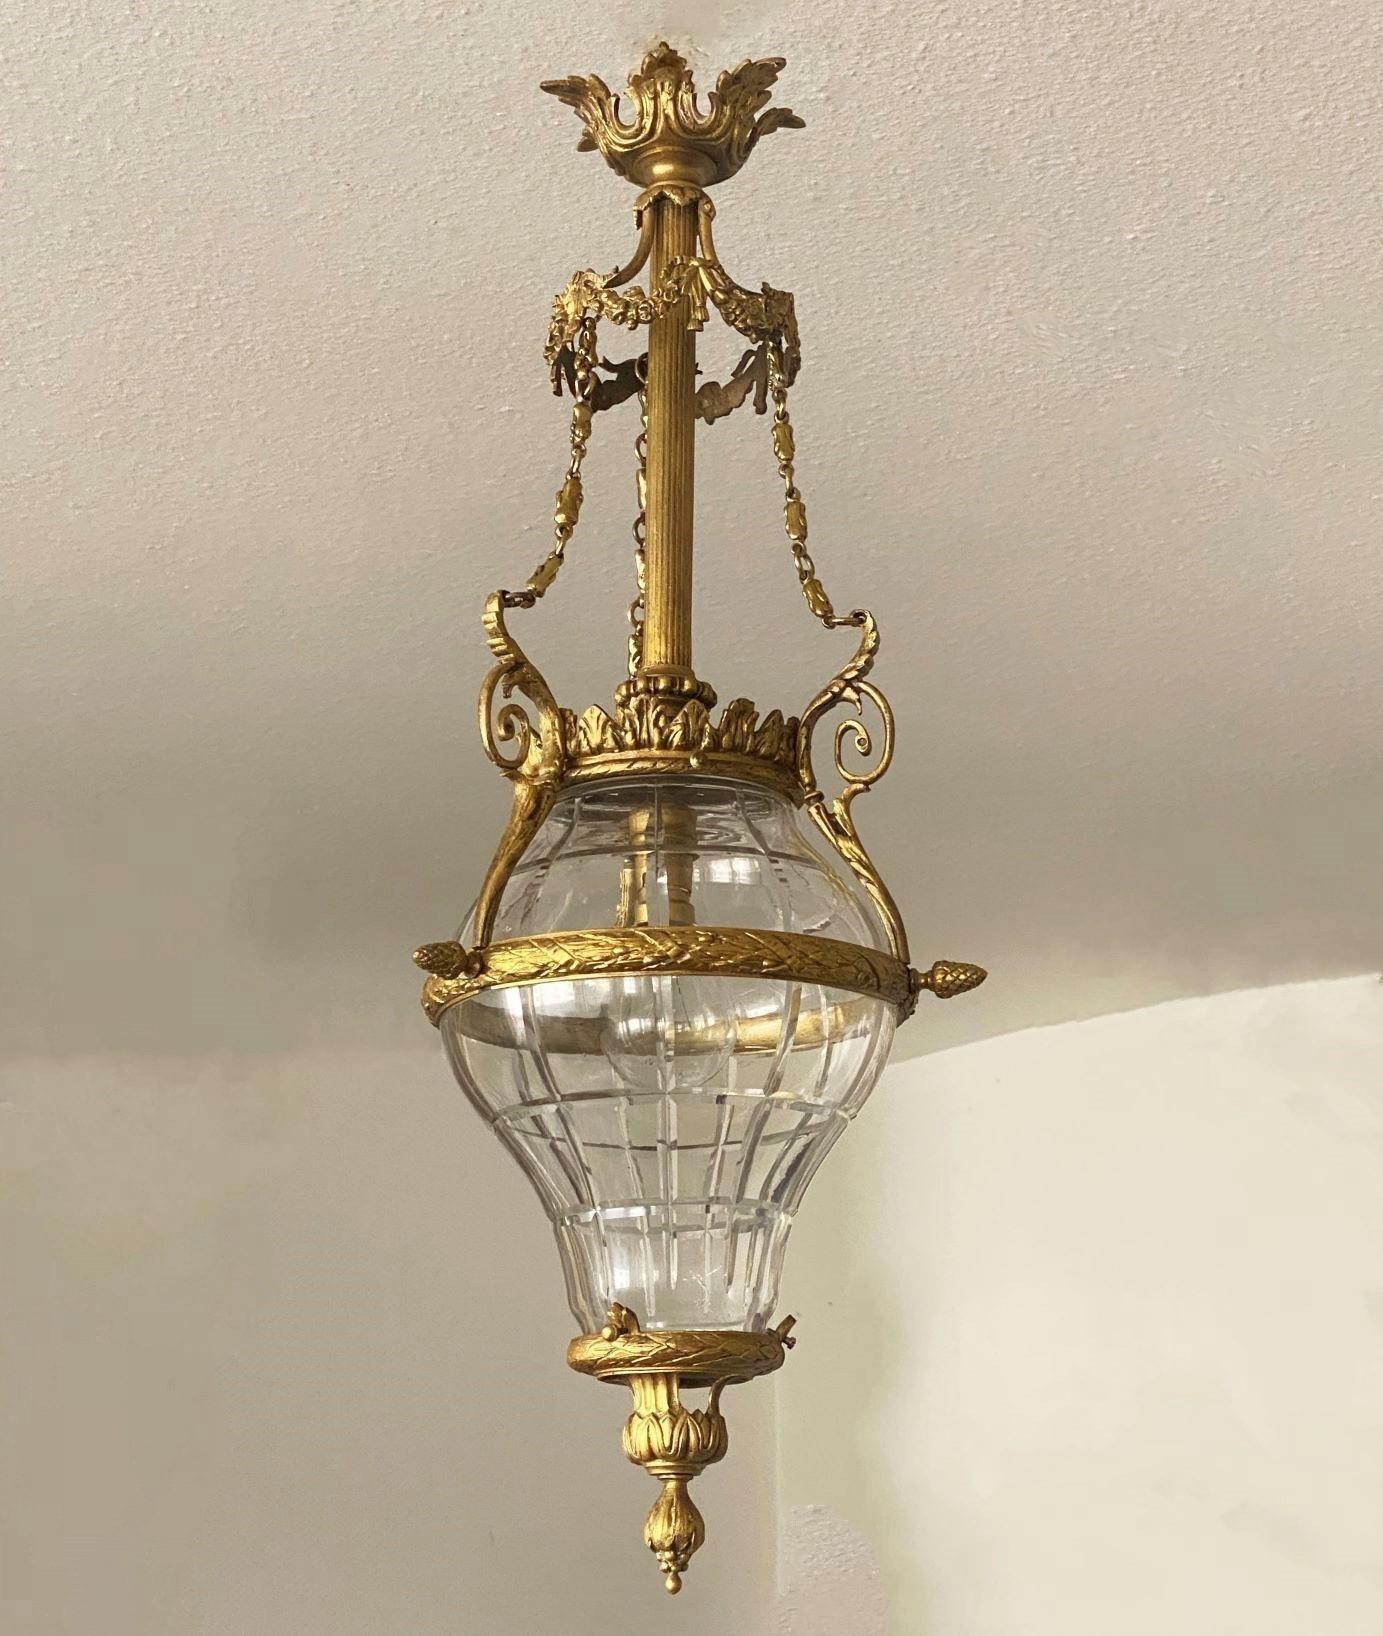 A fine gilt bronze and molded cut-glass lantern in Belle Époque style, France 1900-1910.  The molded and cut-glass body surrounded by finely elaborate bronze detailling with a crown conneting the top by three beautiful chains to a second floral